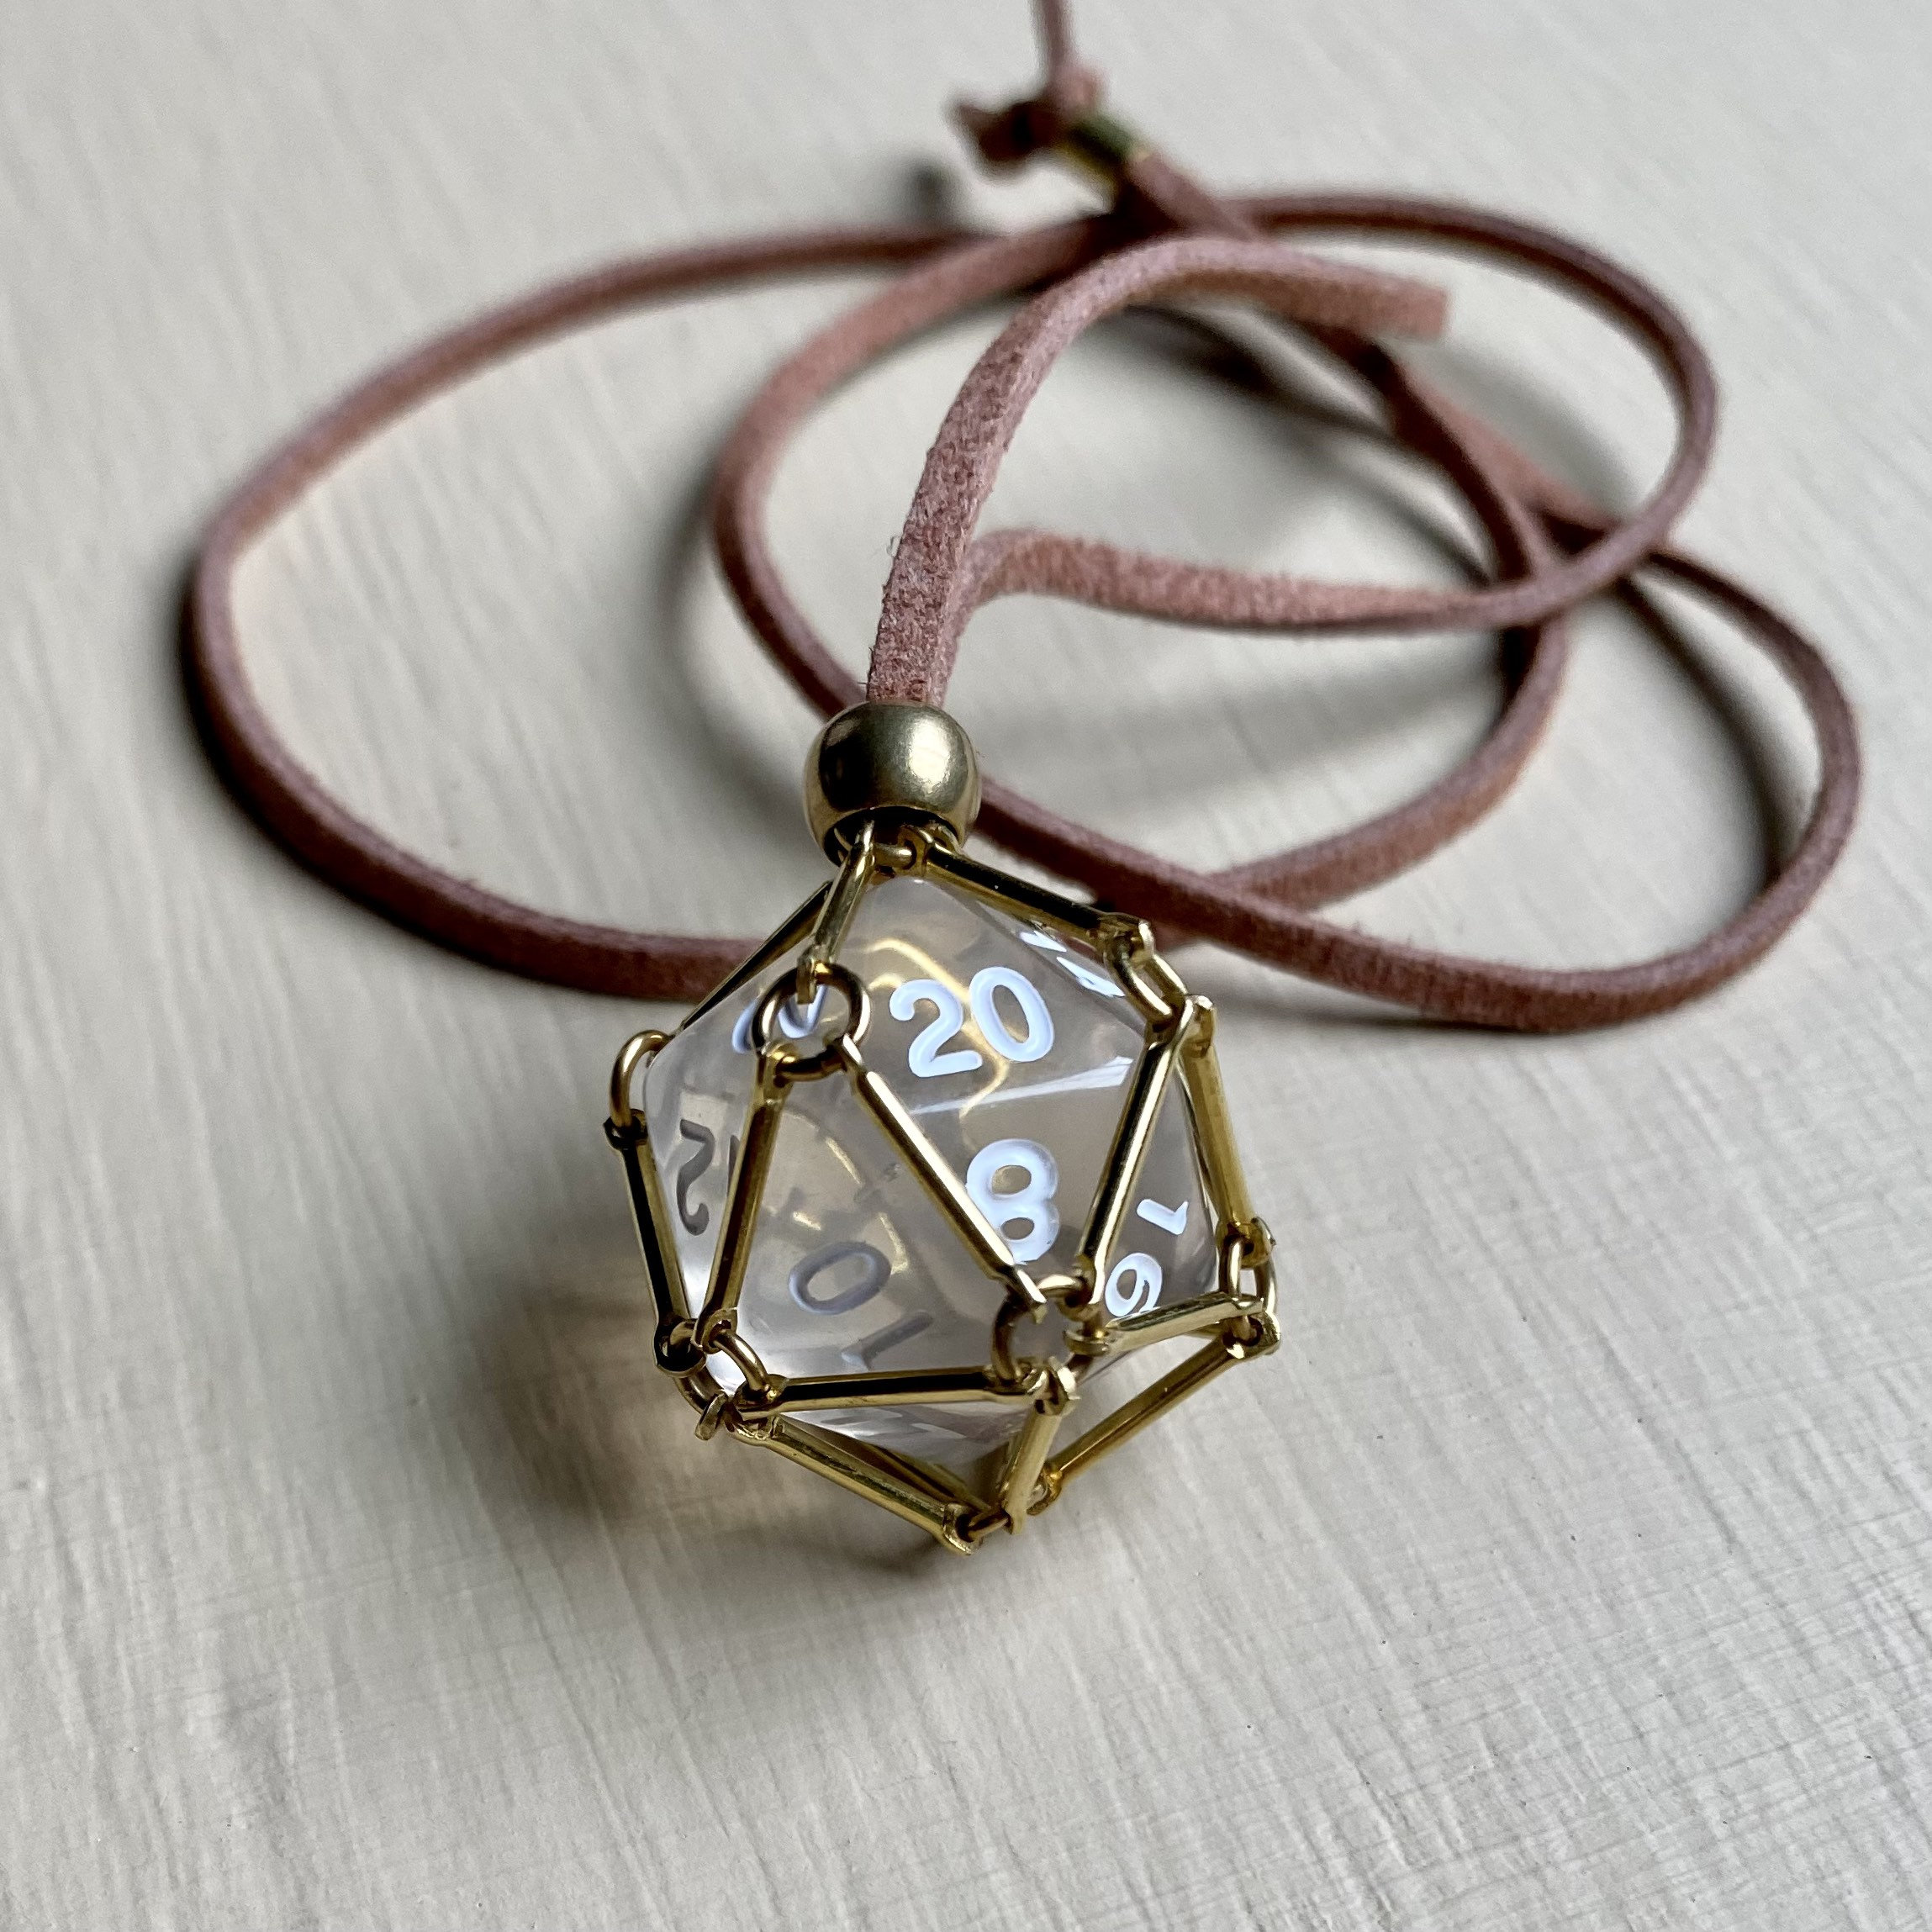 Hasbro Dungeons & Dragons D20 Dice Pendant Necklace – Jewelry Brands Shop